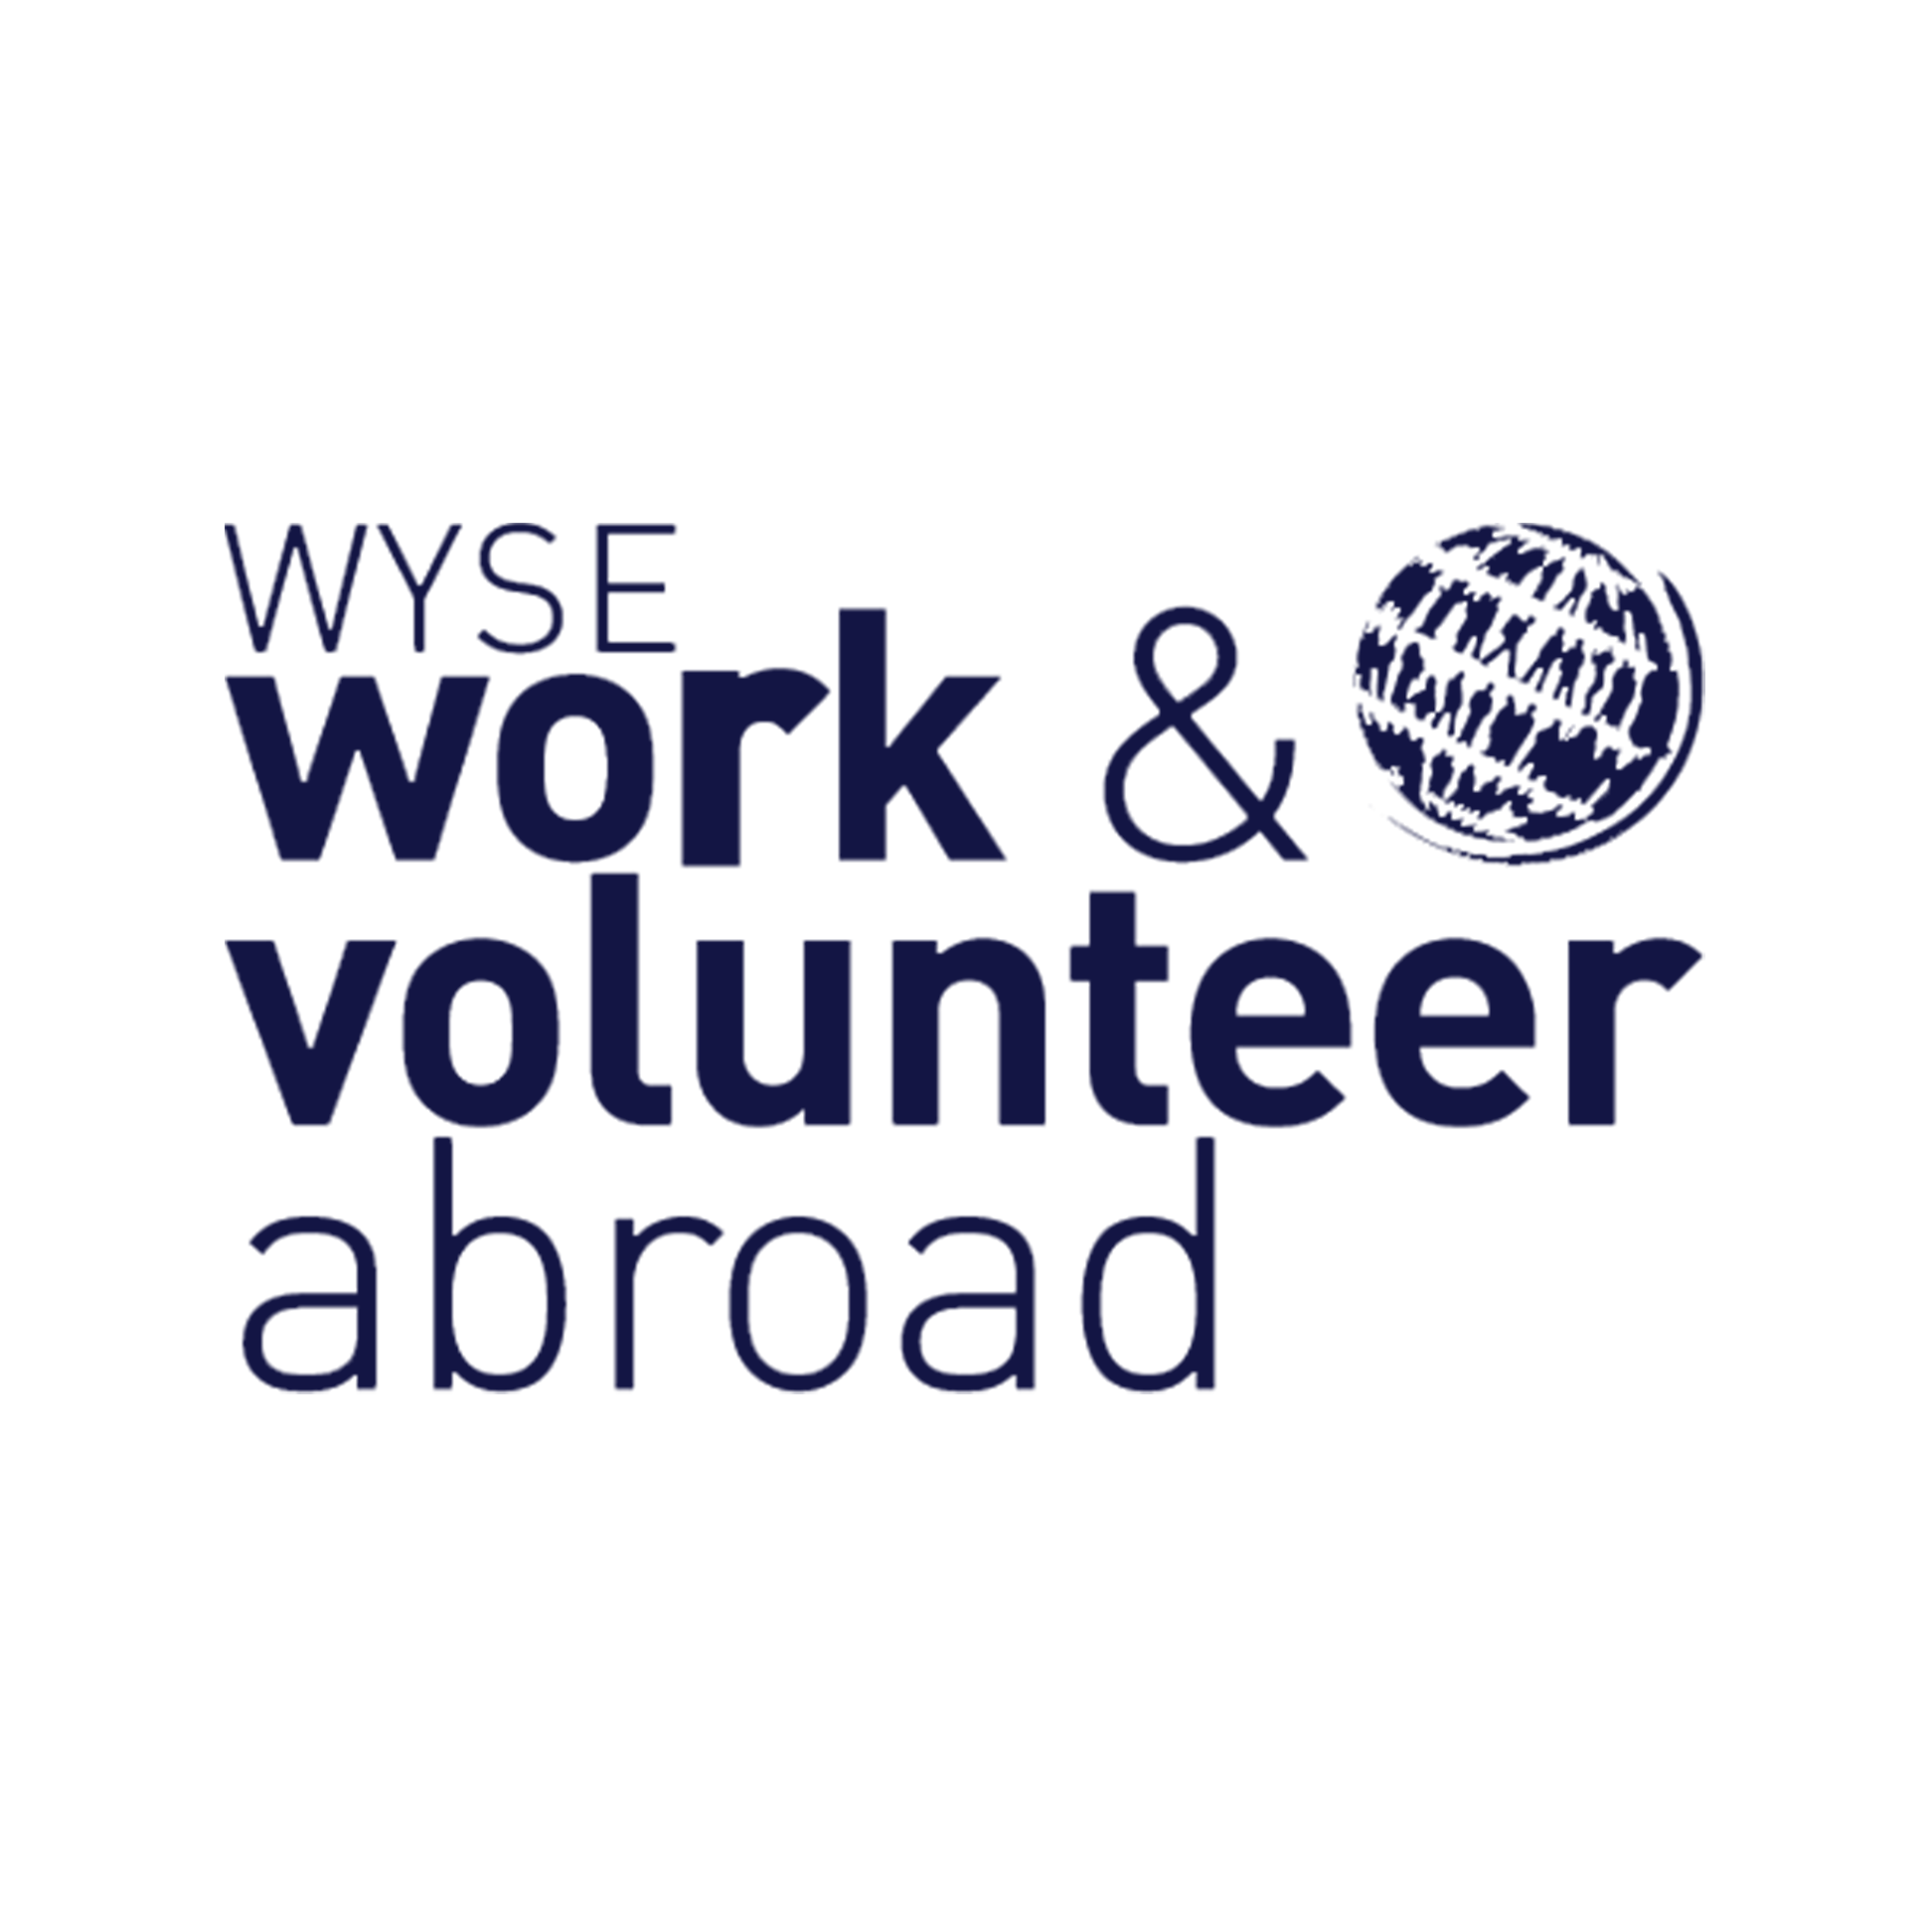 Image containing the logo of WYSE work and volunteer abroad